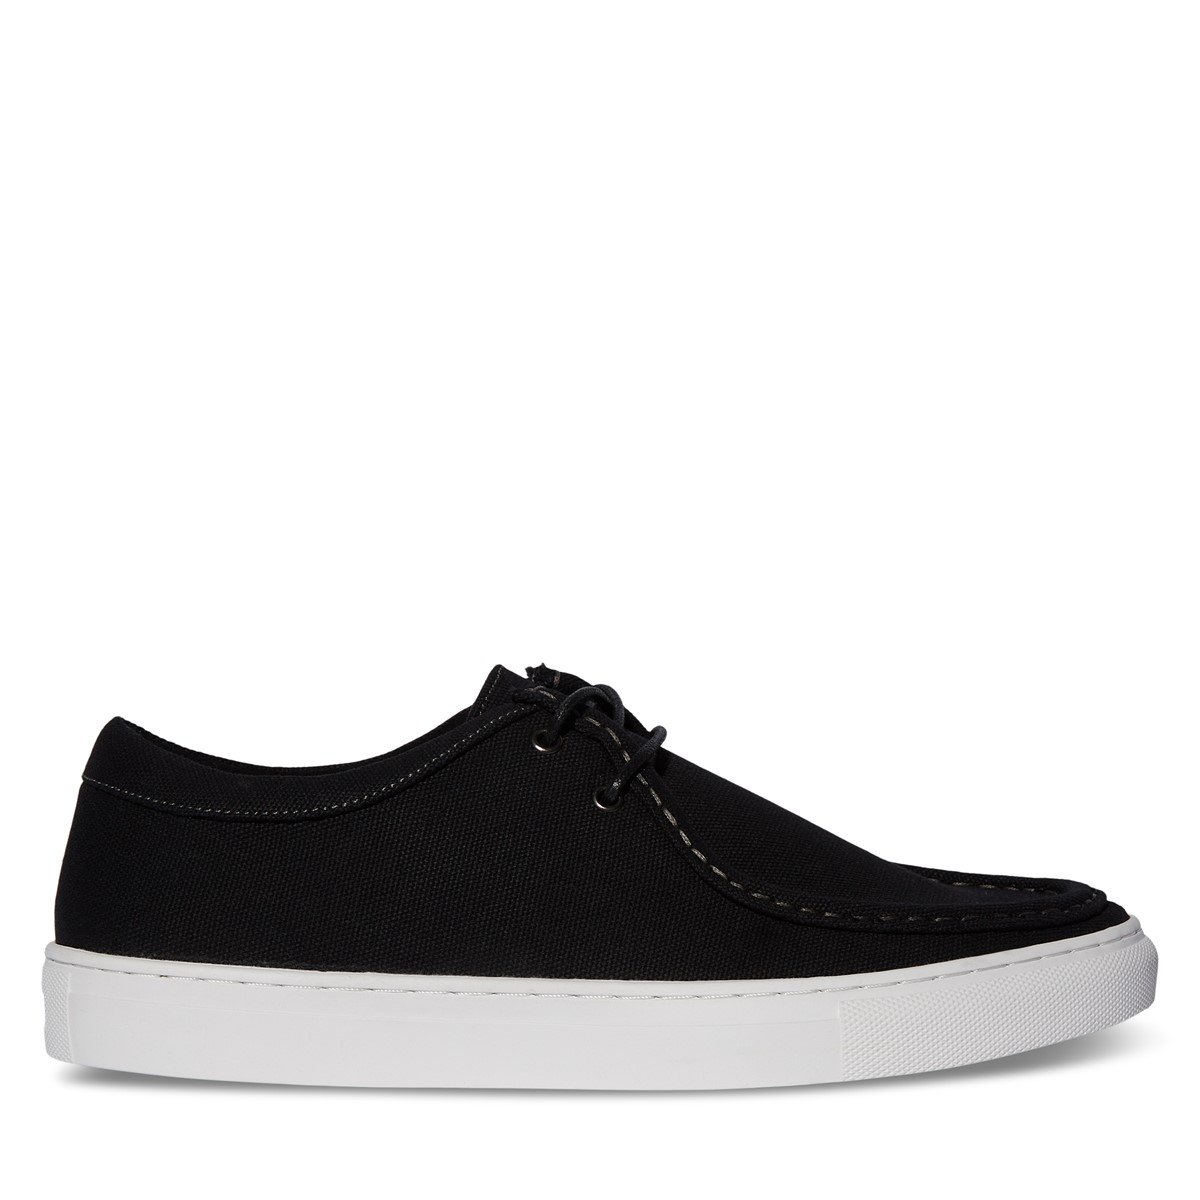 Men's Henry Lace-Up Shoes in Black